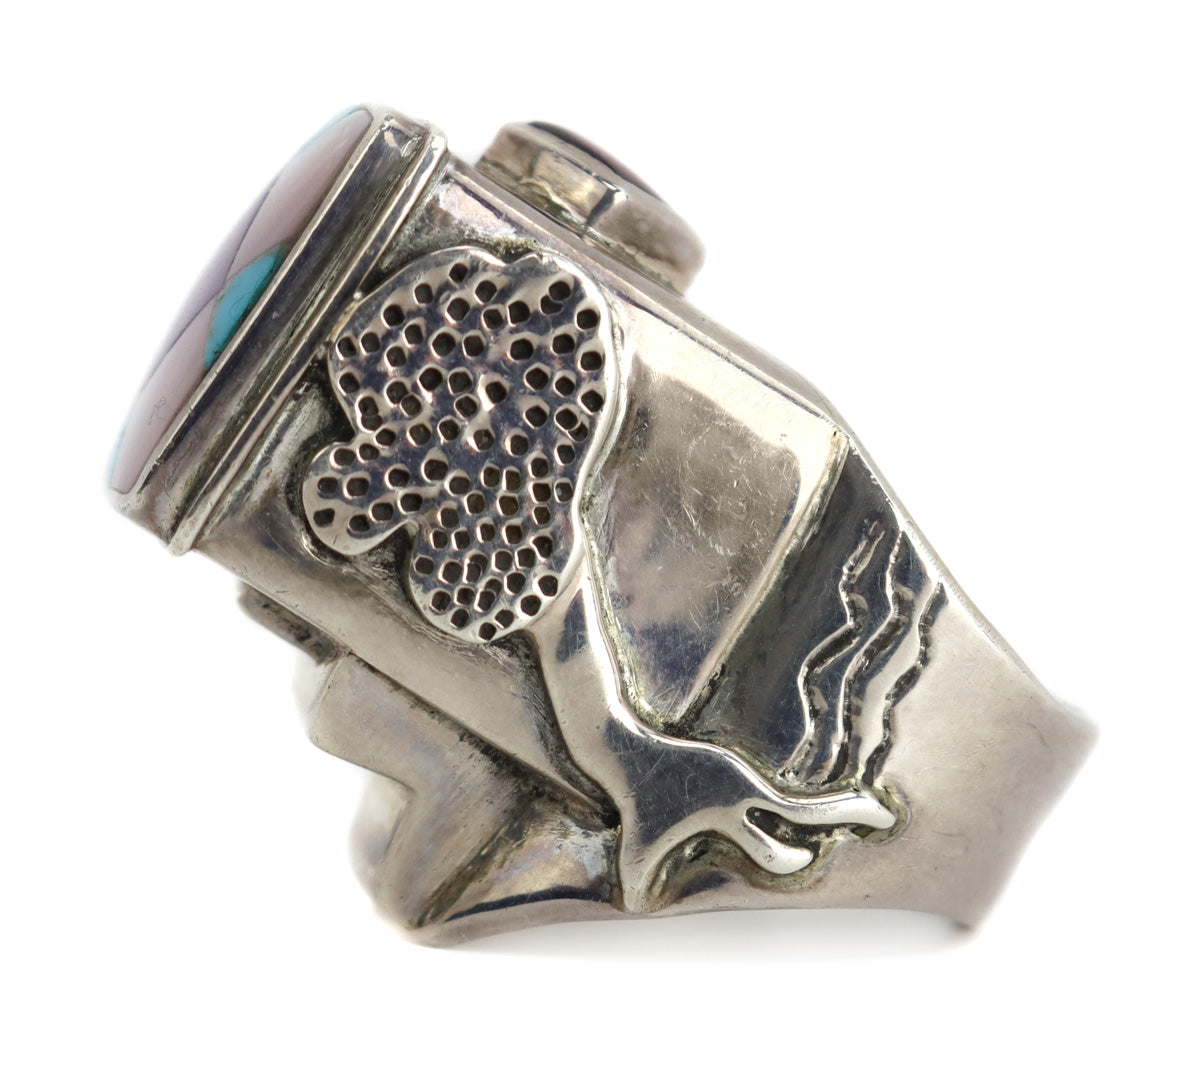 Eveli Sabatie - "Temple of Water" Multi-Stone Channel Inlay Ring c. 1990s, size 7.5 (J91903C-0922-002) 3